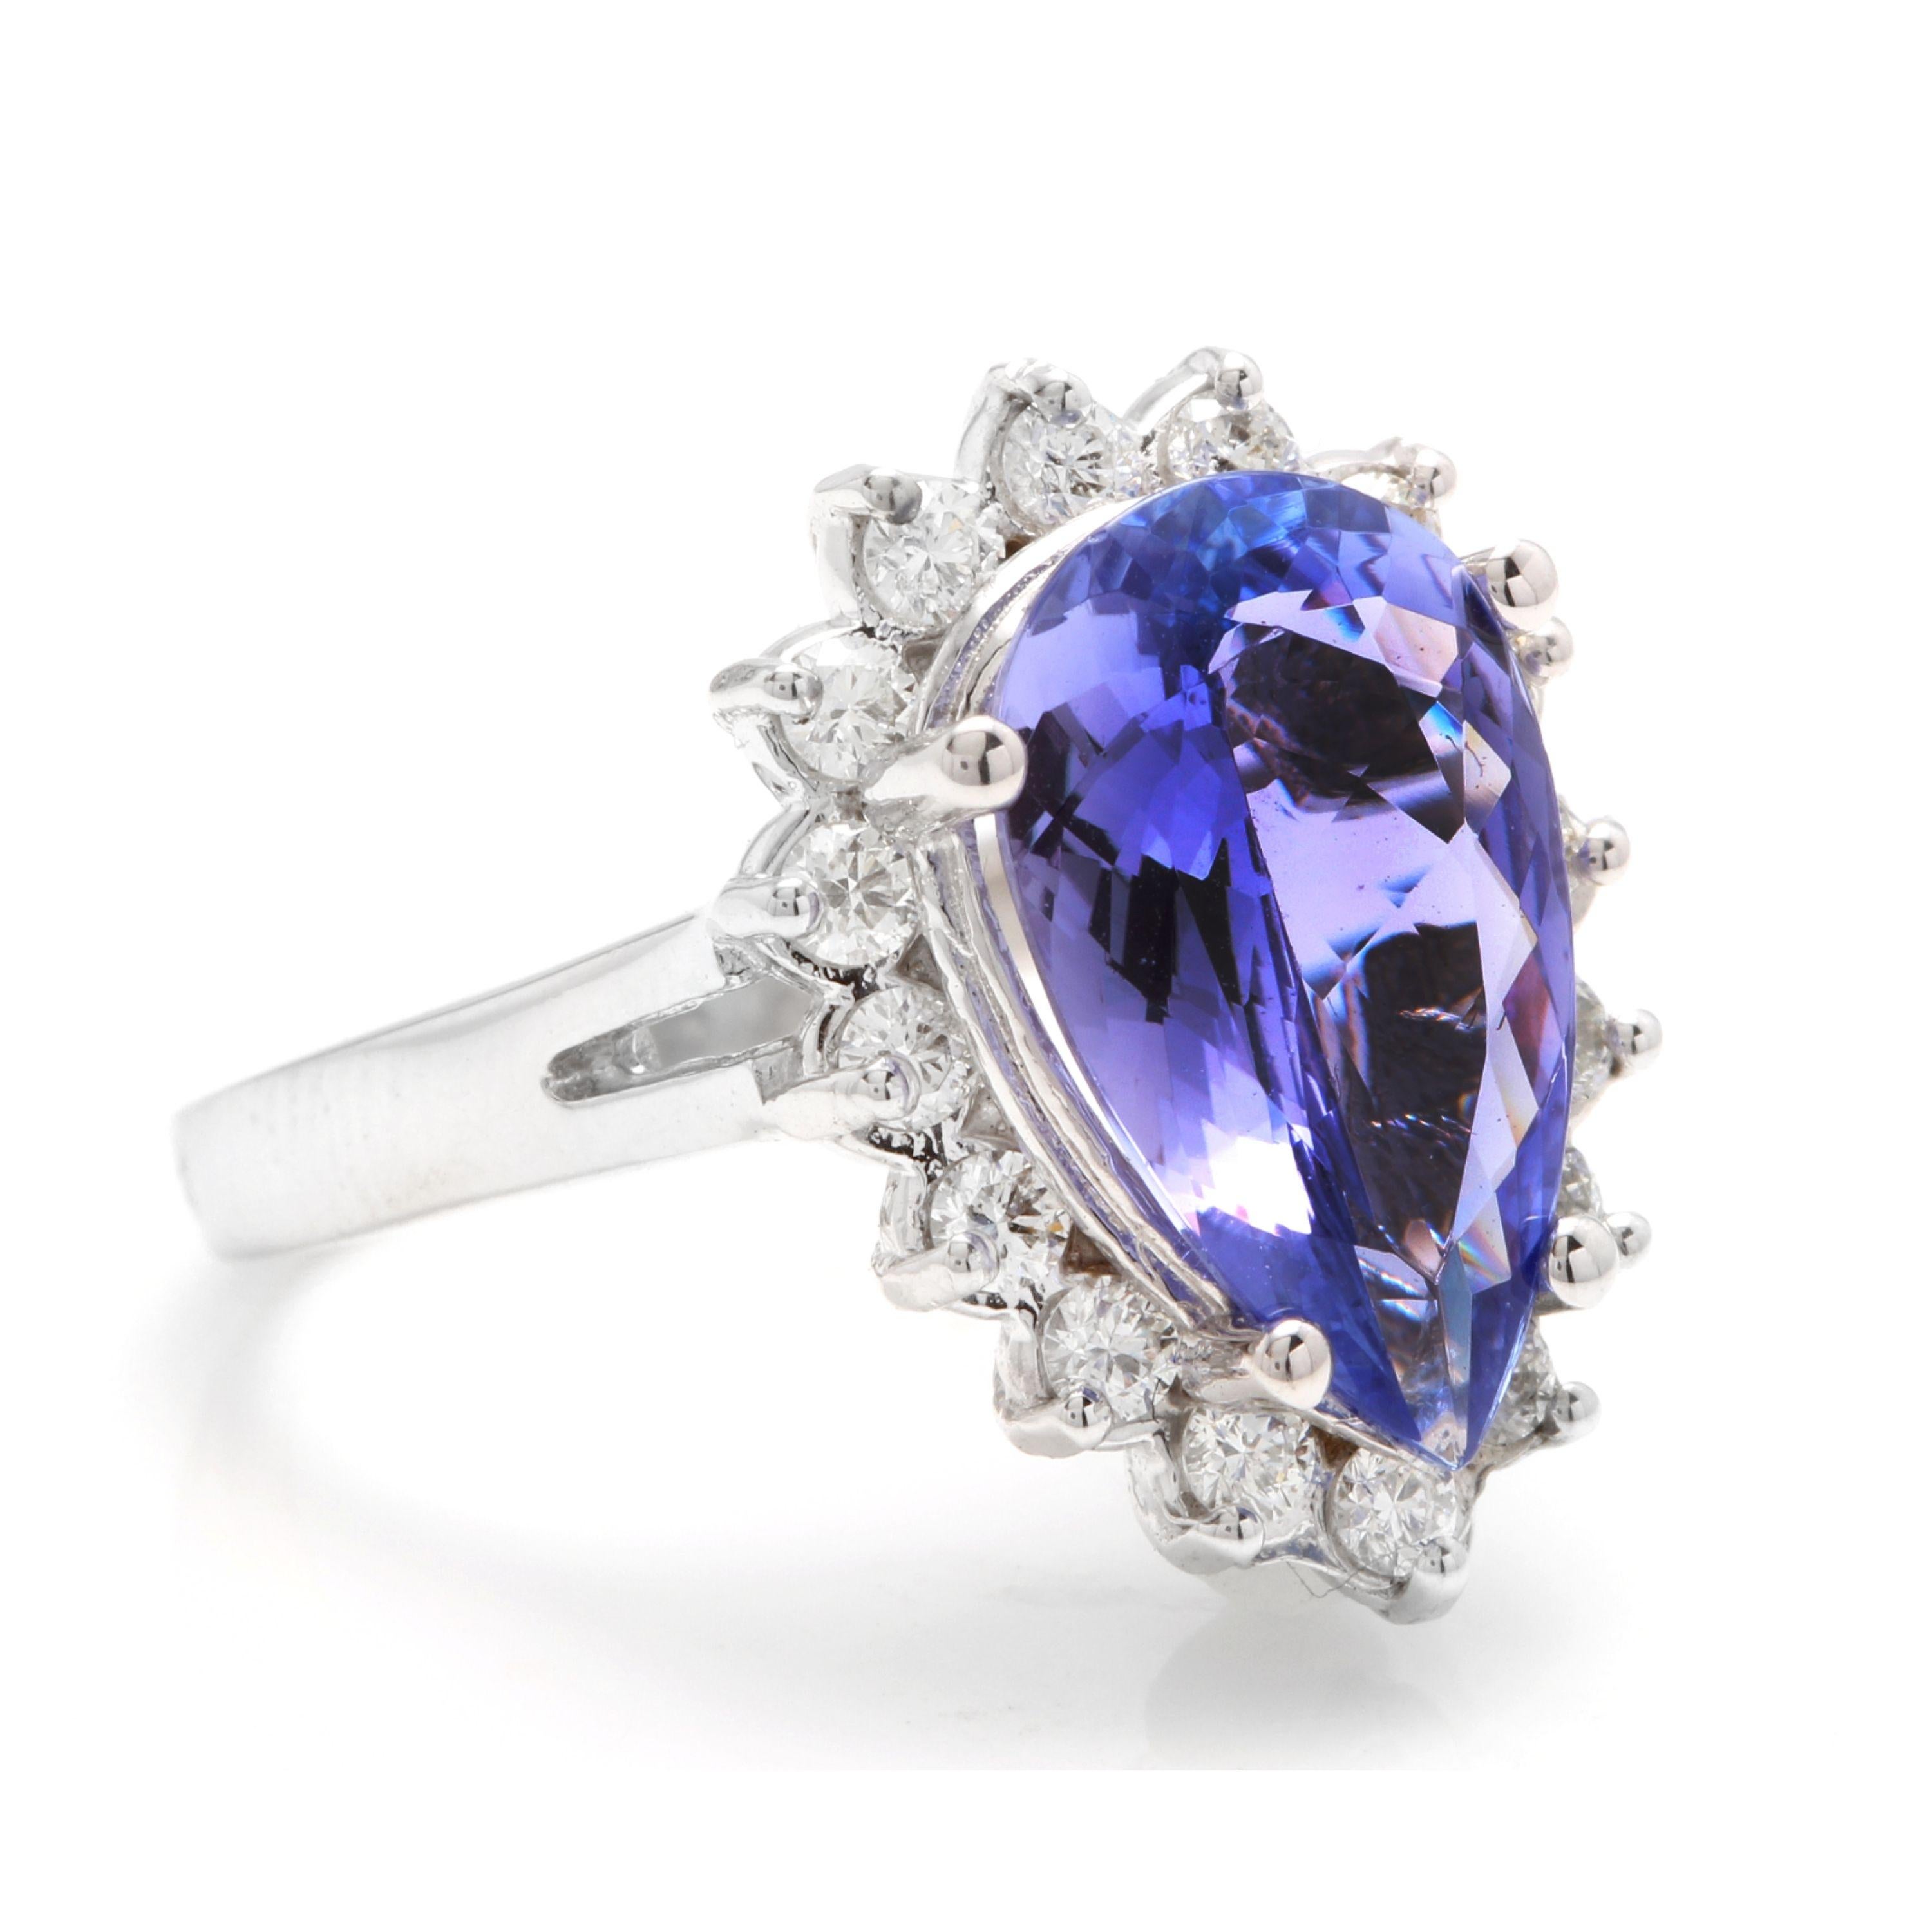 6.50 Carats Natural Very Nice Looking Tanzanite and Diamond 14K Solid White Gold Ring

Total Natural Pear Shaped Tanzanite Weight is: Approx. 6.00 Carats

Tanzanite Measures: Approx. 14.50 x 8.50mm

Natural Round Diamonds Weight: Approx. 0.50 Carats